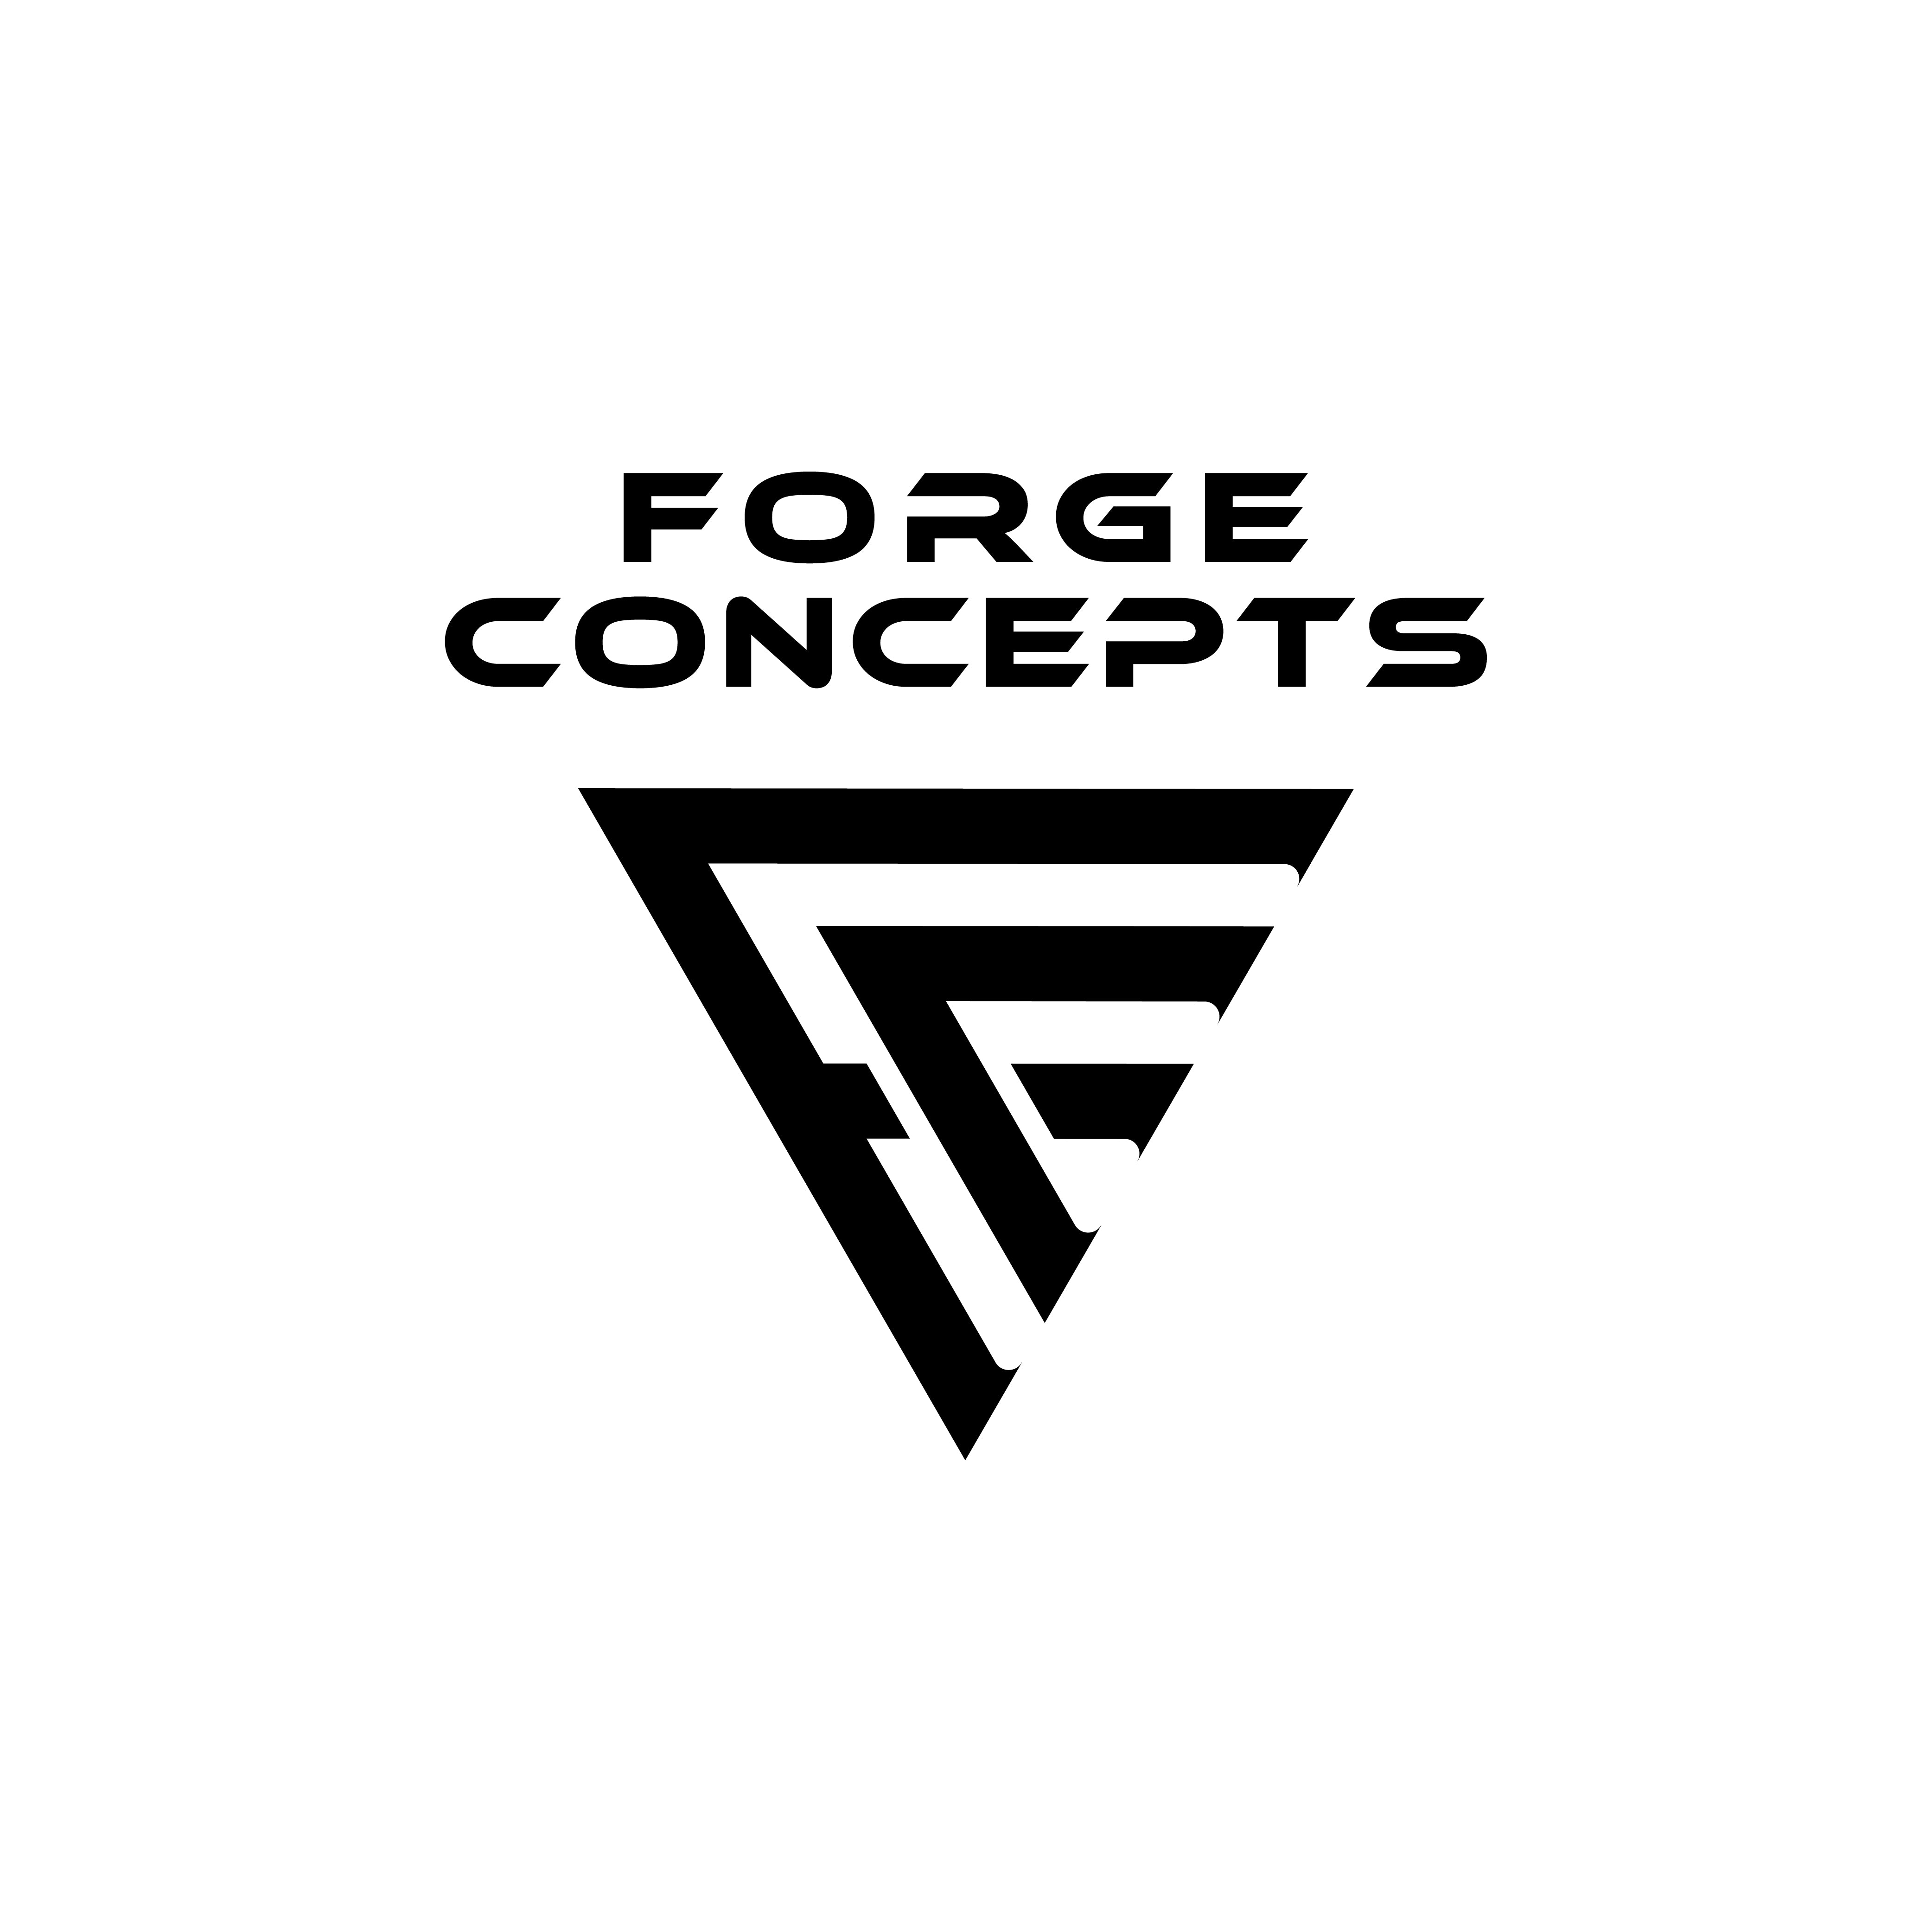 Forge Concepts